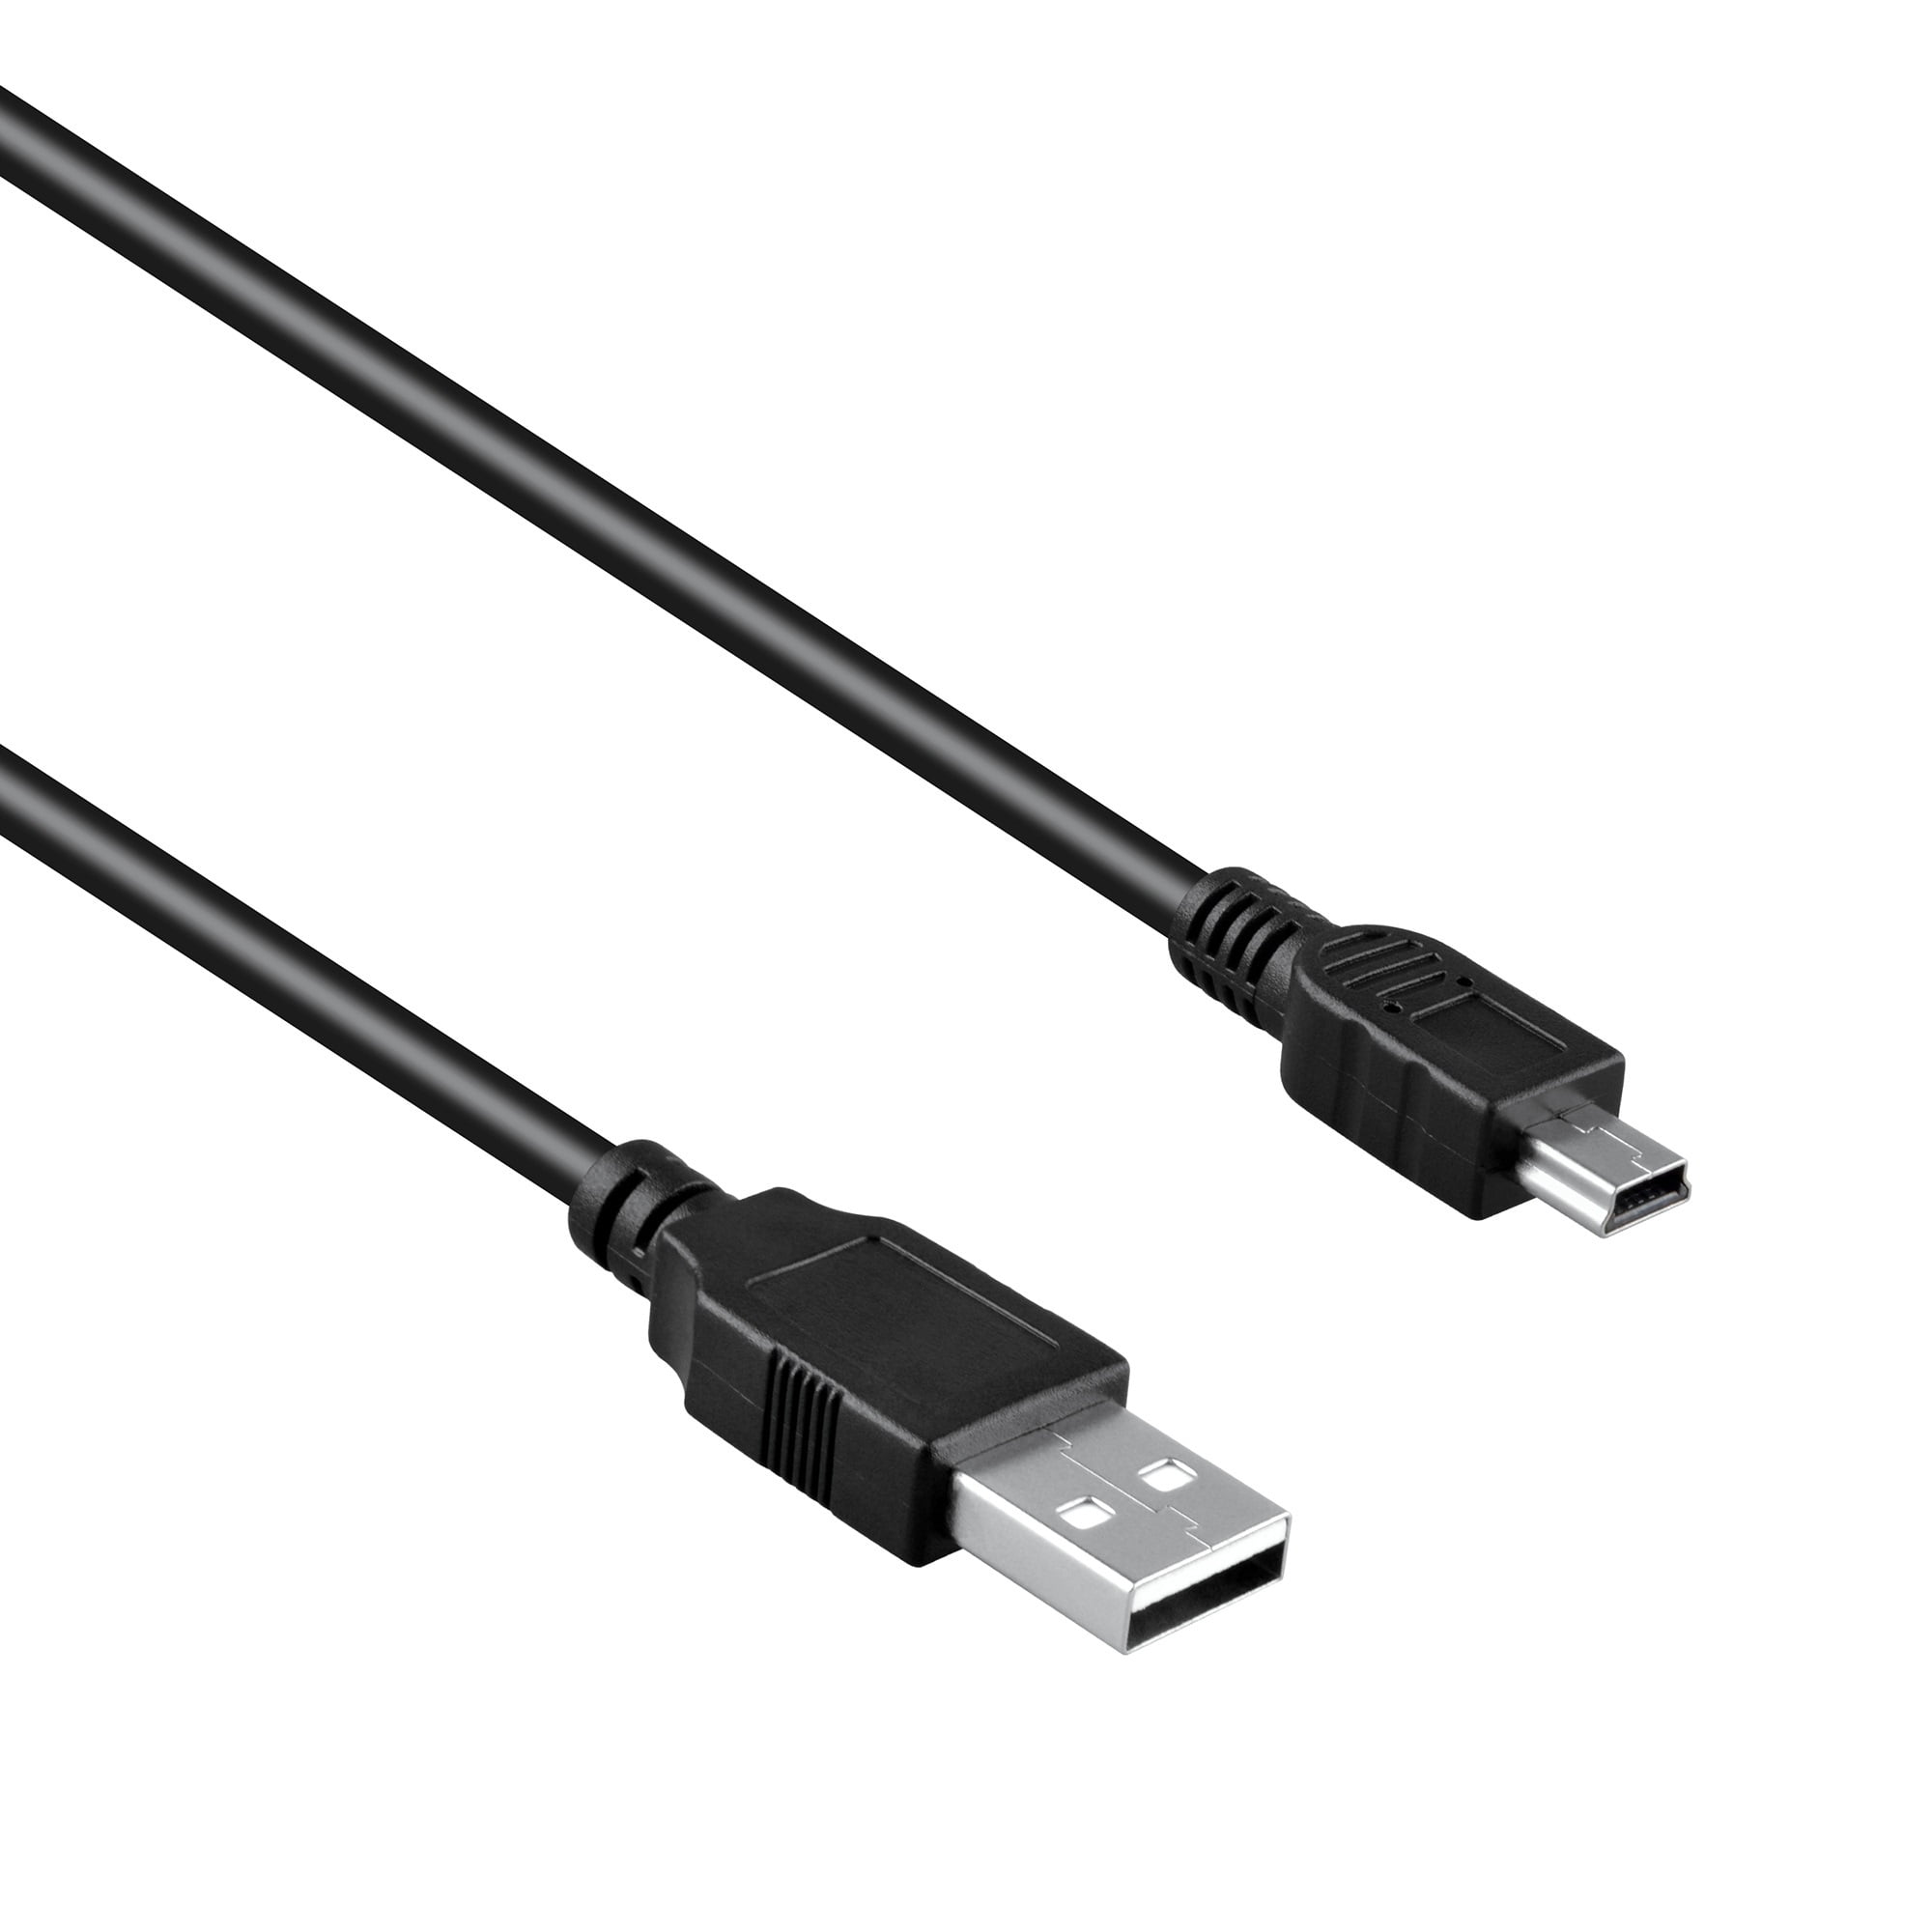 K-MAINS 5ft Mini USB Data Charging Cable Cord Wacom Bamboo Tablet CTH-470 CTH-470M -